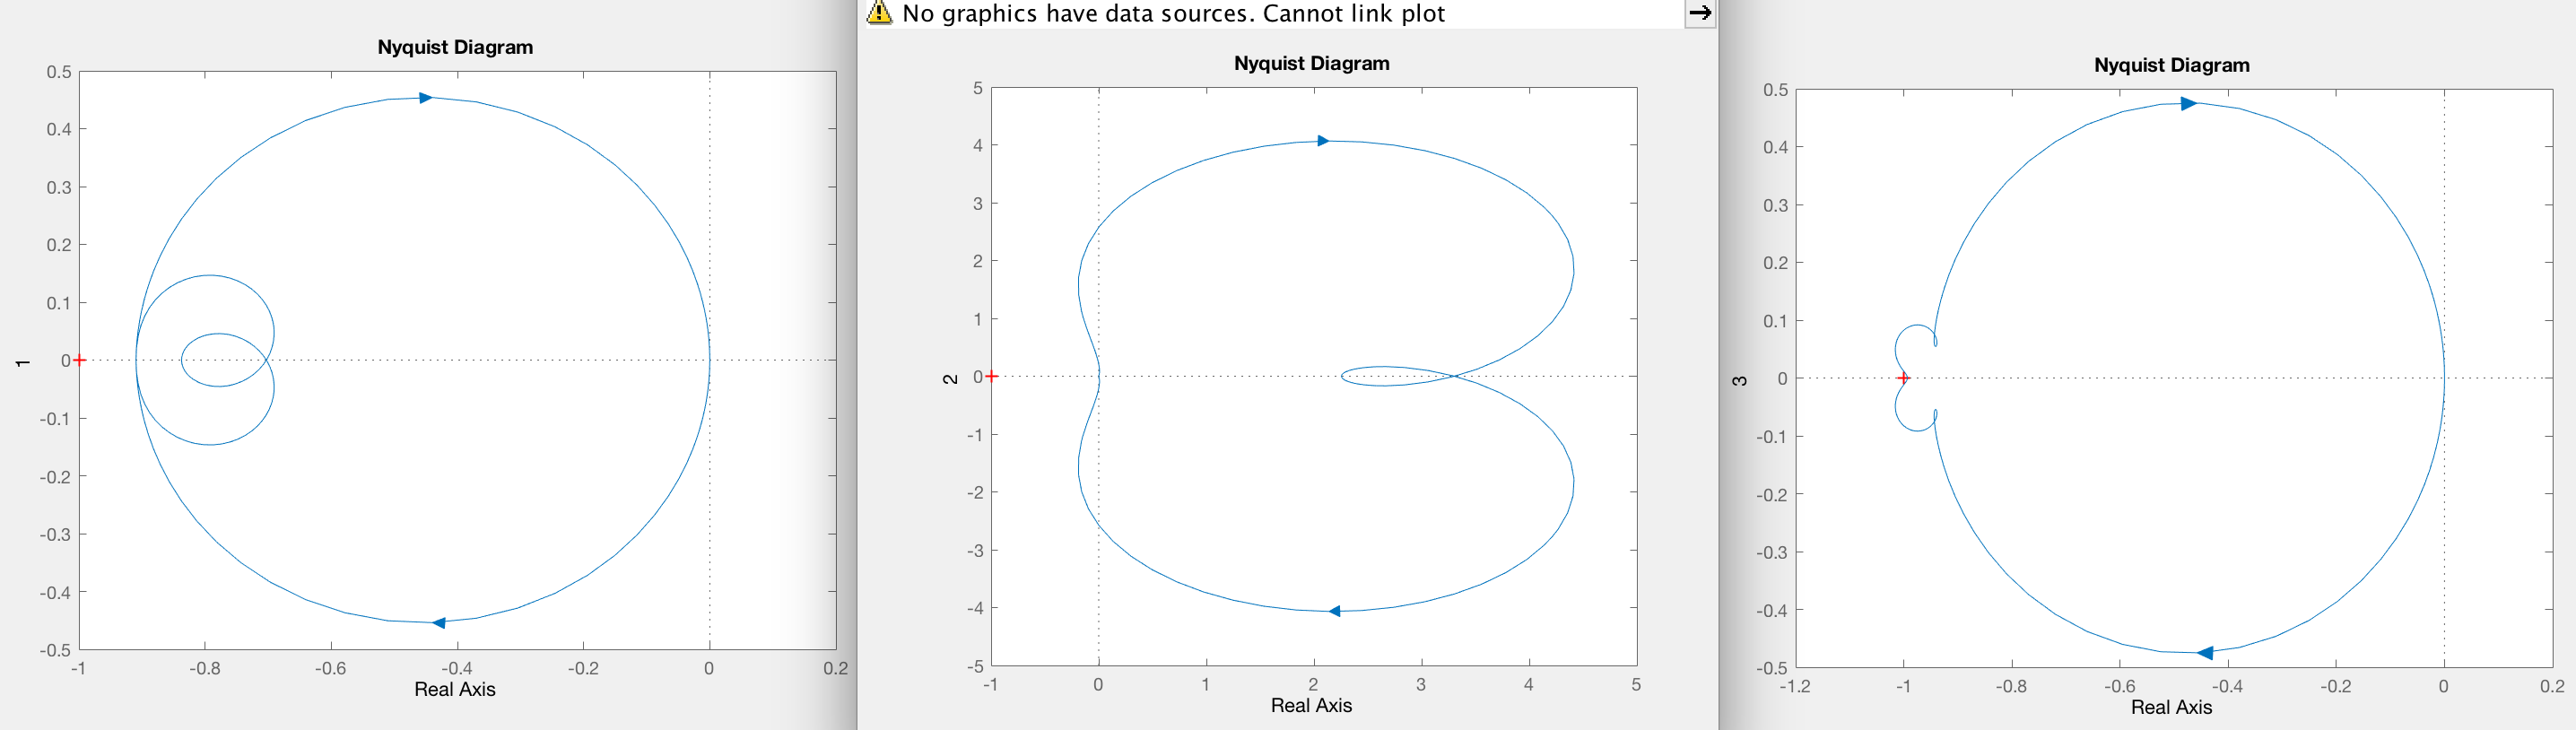 A No graphics have data sources. Cannot link plot
Nyquist Diagram
Nyquist Diagram
Nyquist Diagram
0.5
0.5
0.4
0.4
0.3
3
0.3
0.2
0.2
0.1
0.1
0+
-0.1
-1
-0.1
-0.2
-2
-0.2
-0.3
-3
-0.3
-0.4
-4
-0.4
-0.5
-1
-5
-1
-0.5
-1.2
-0.8
-0.6
-0.4
-0.2
0.2
4
-0.4
-0.2
-0.8
-0.6
Real Axis
-1
0.2
Real Axis
Real Axis
3
4-
2.
of
